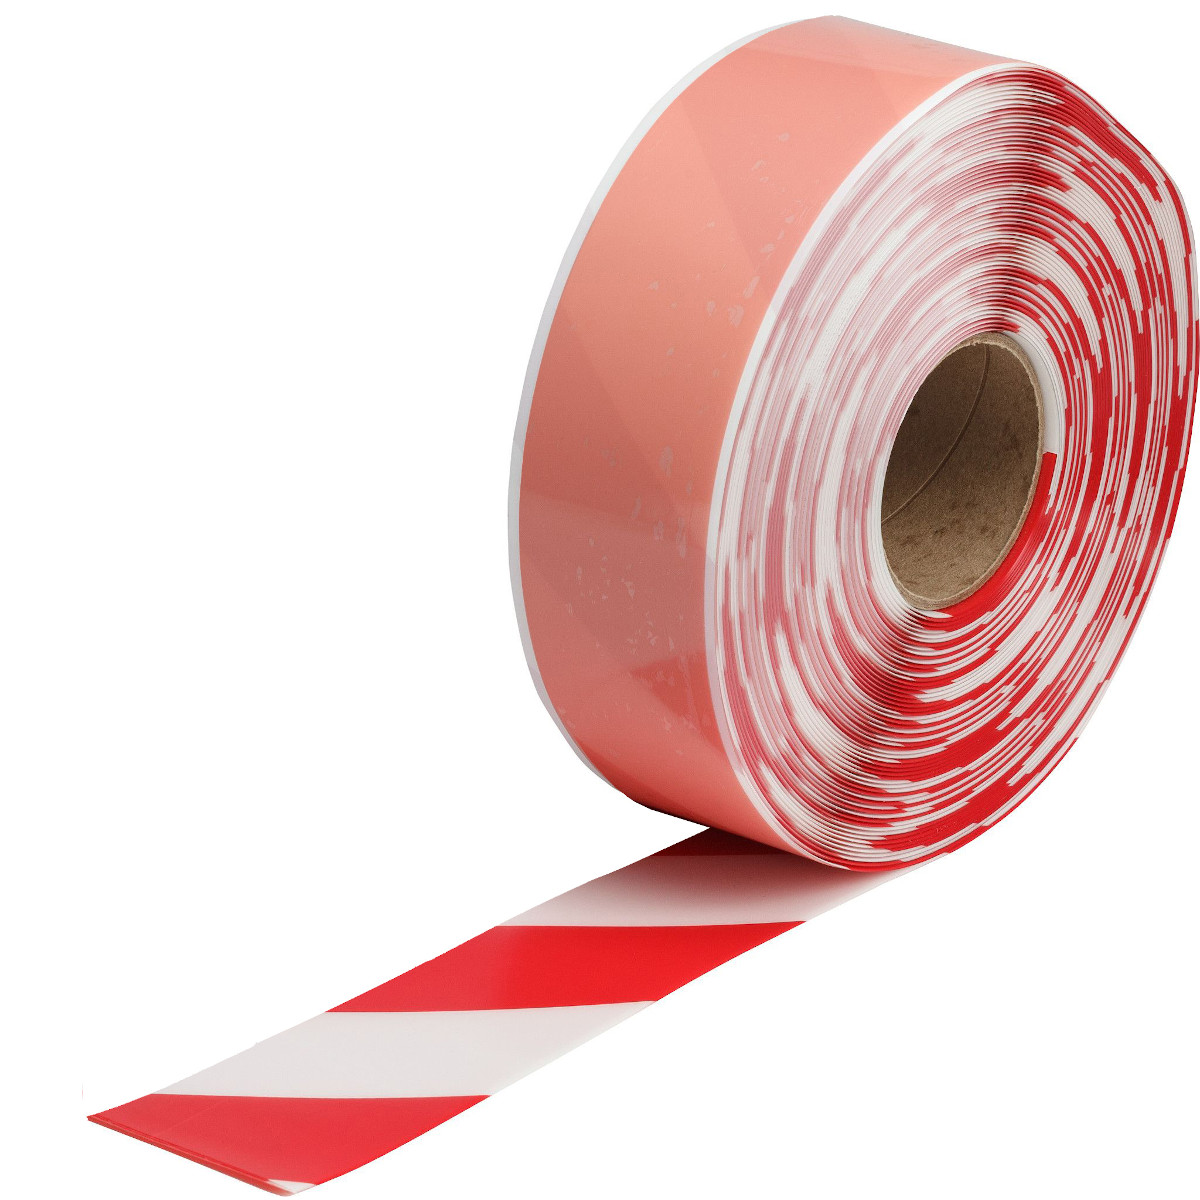 【170072】3" X 100' B543 THICK RED/WHT FLO